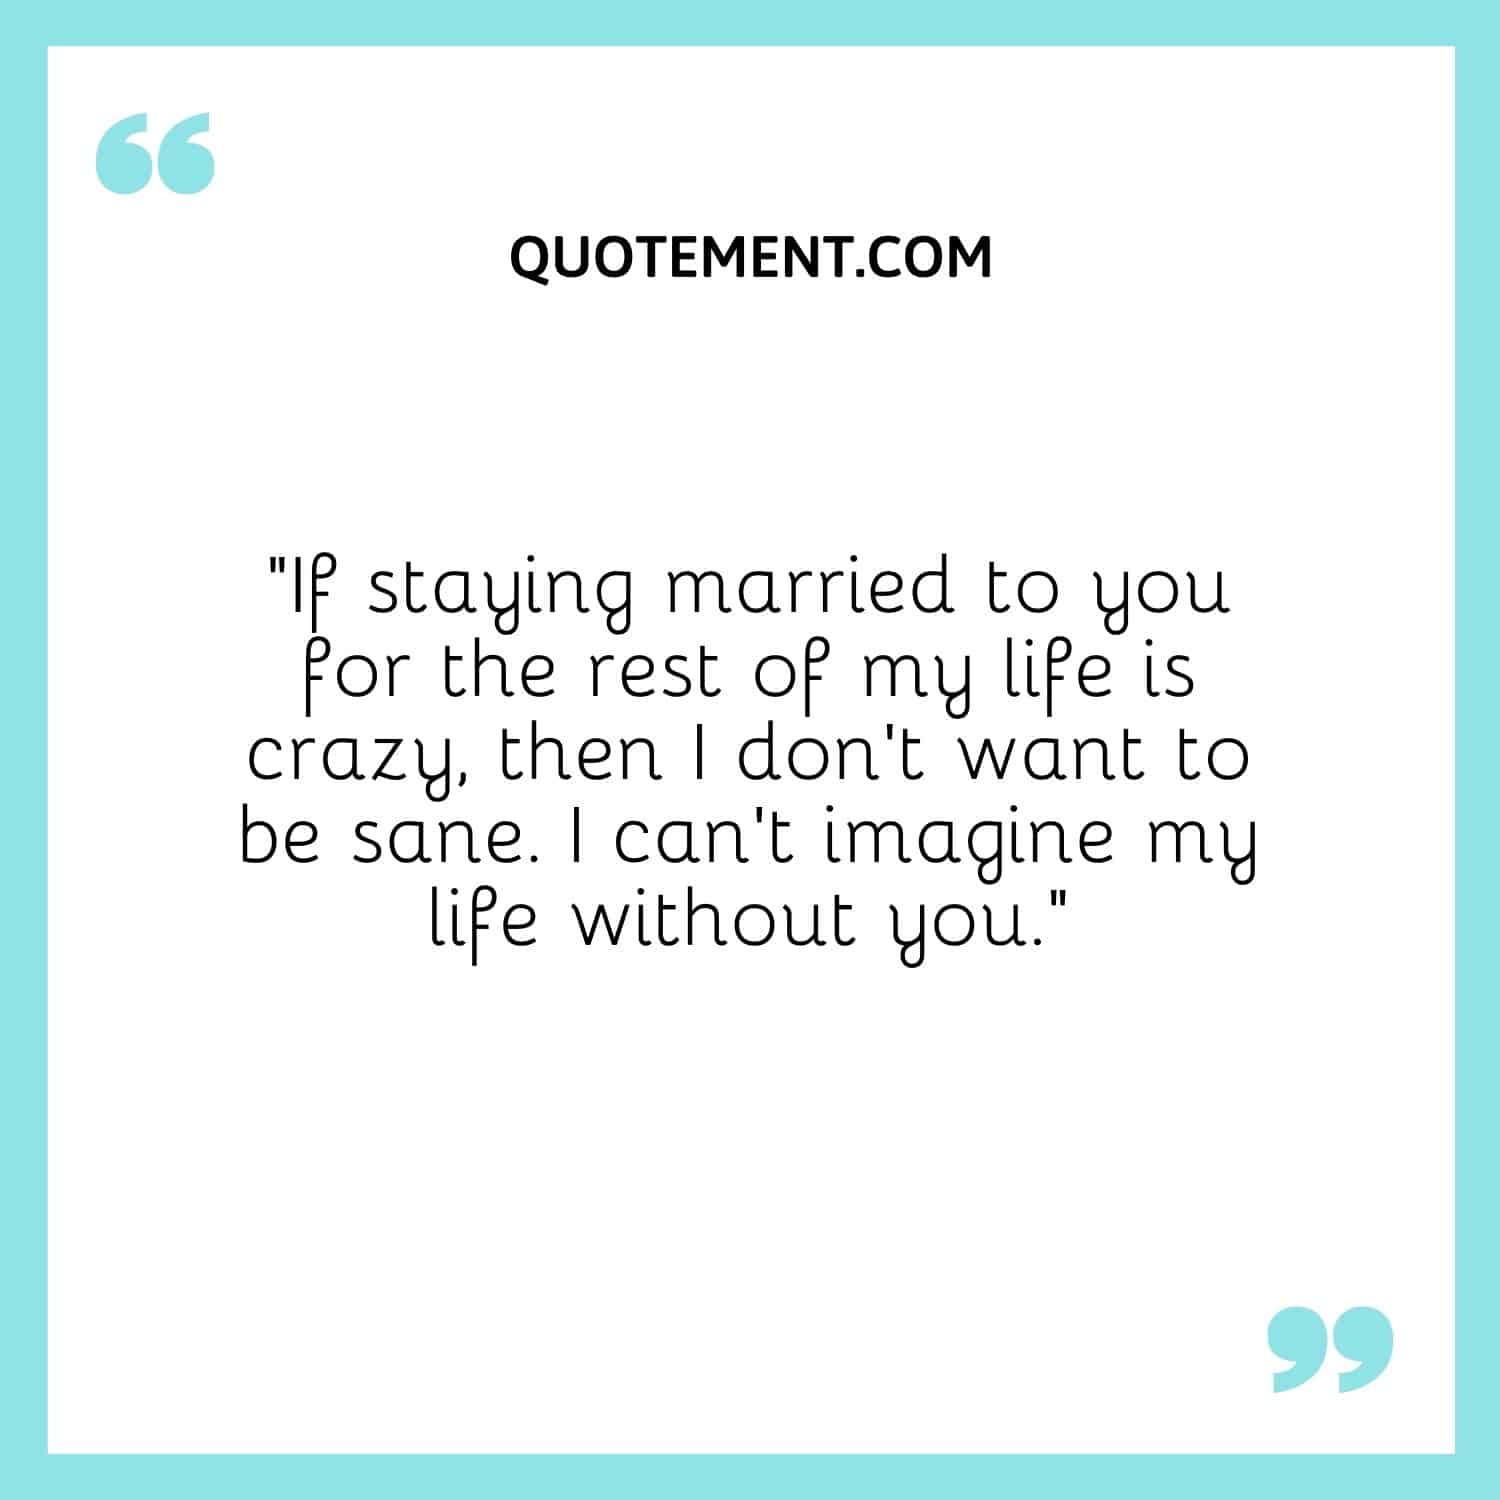 “If staying married to you for the rest of my life is crazy, then I don’t want to be sane. I can’t imagine my life without you.”